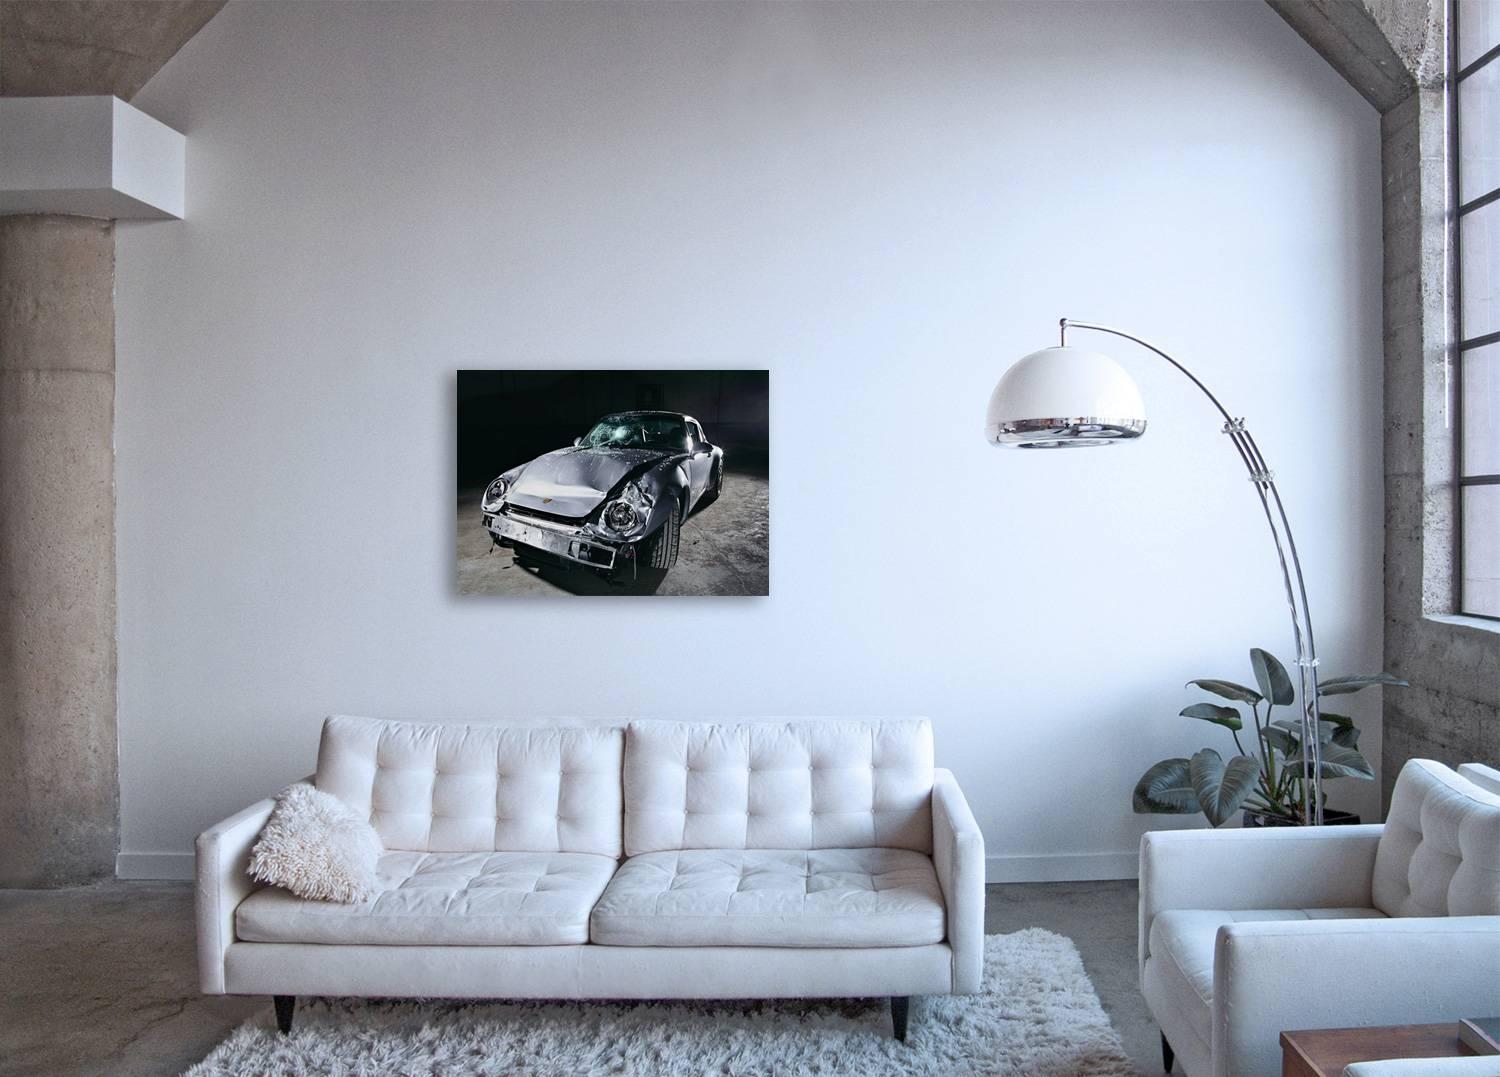 NINE-ONE-ONE ( Porsche 911 ) - framed detailed photograph of crashed automobile  - Photograph by Frank Schott